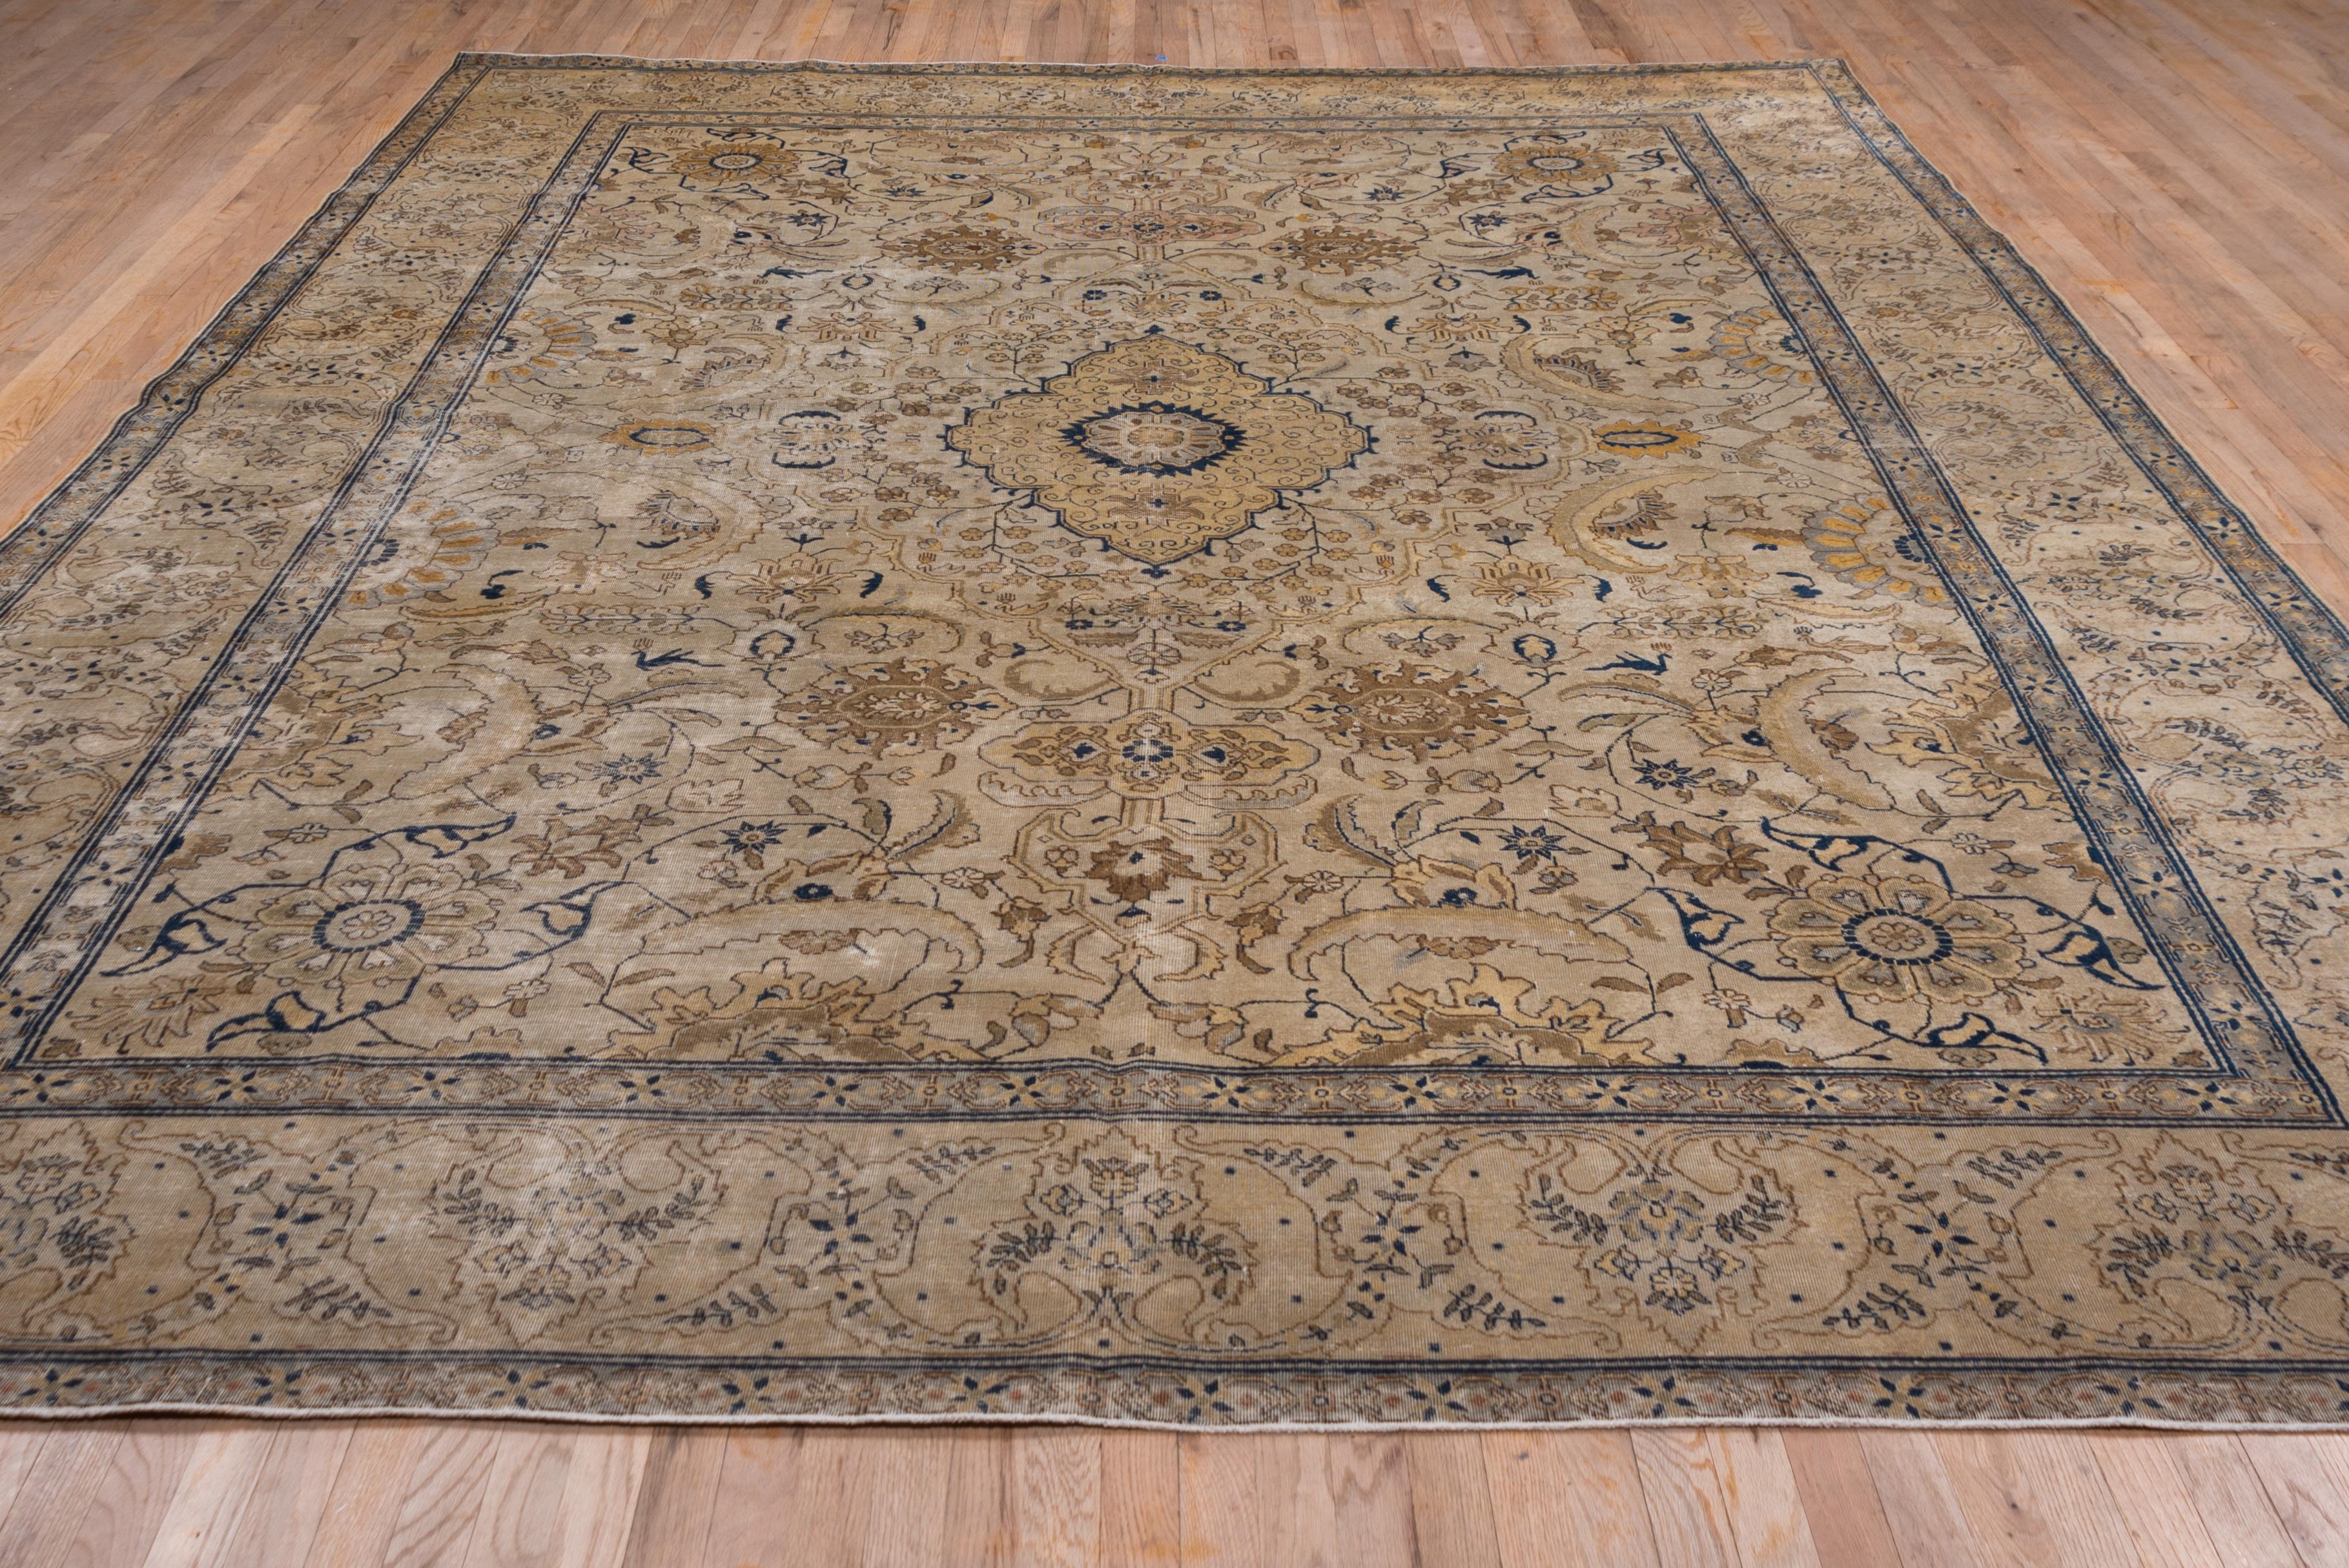 Hand-Knotted Antique Tabriz Carpet, circa 1920s Gold Tones For Sale